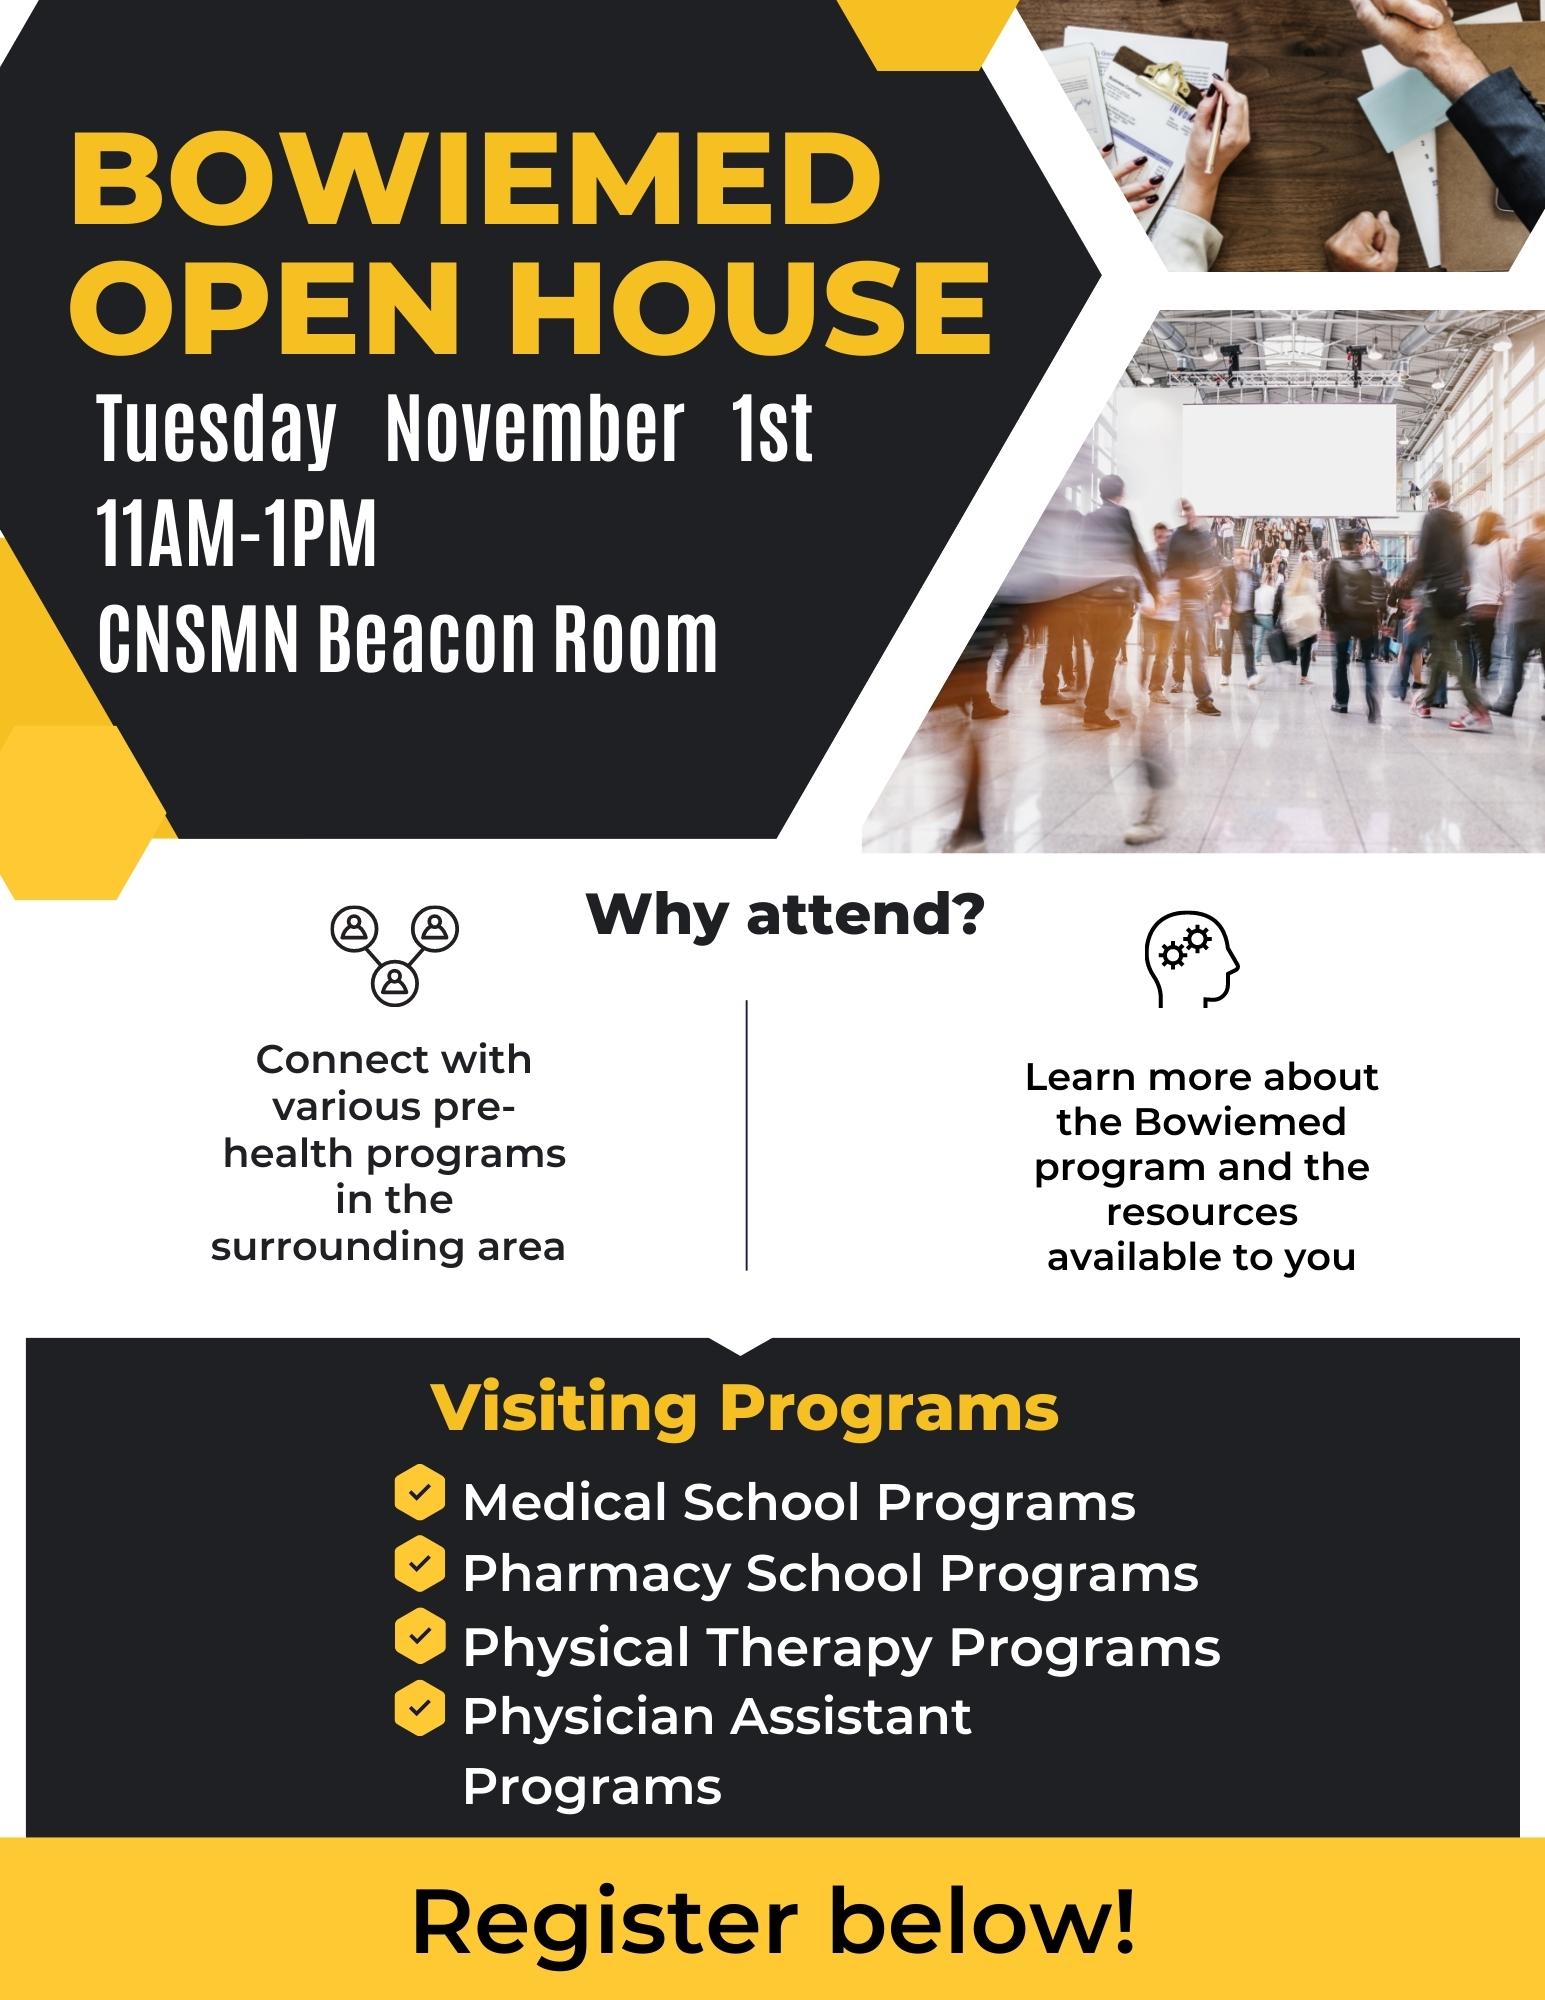 Flyer providing information about the Bowie Med Open House.